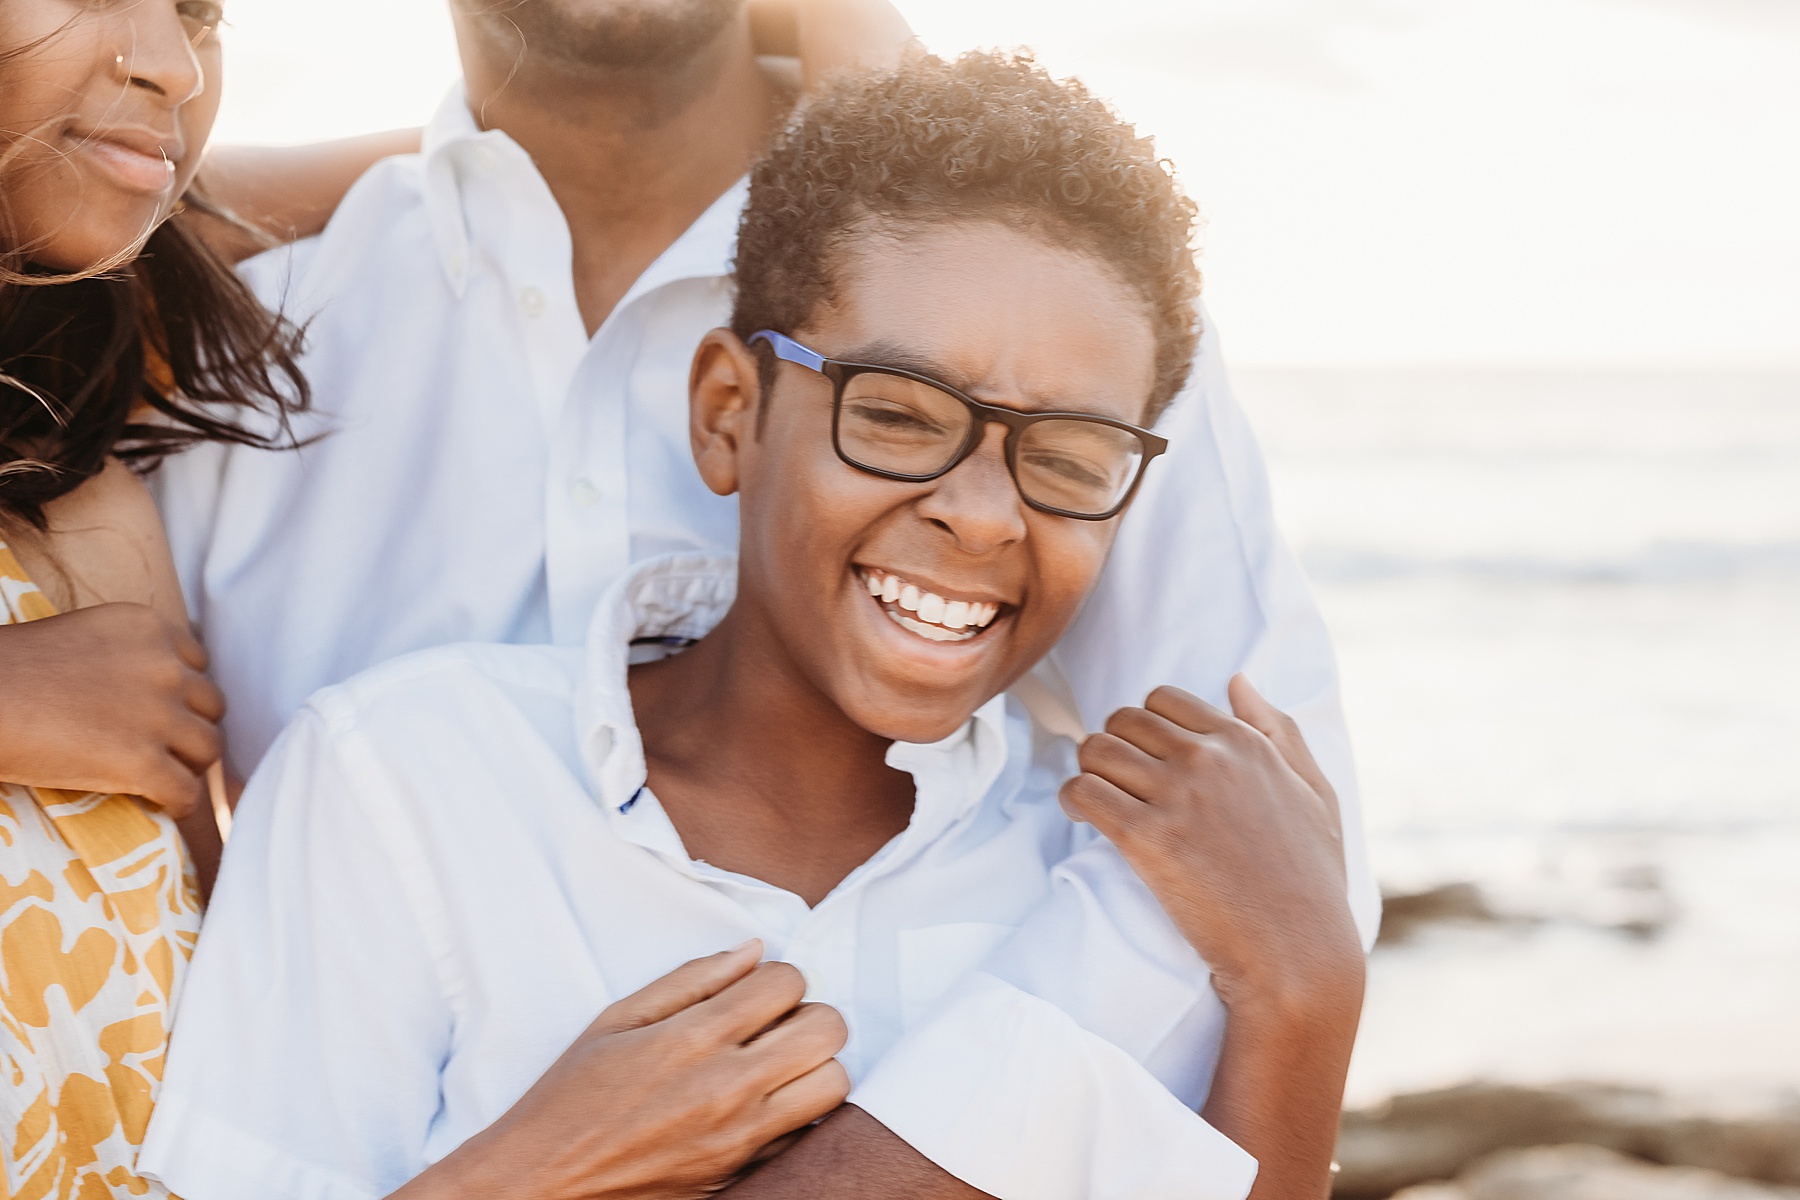 black boy in white shirt with blue rimmed glasses laughing